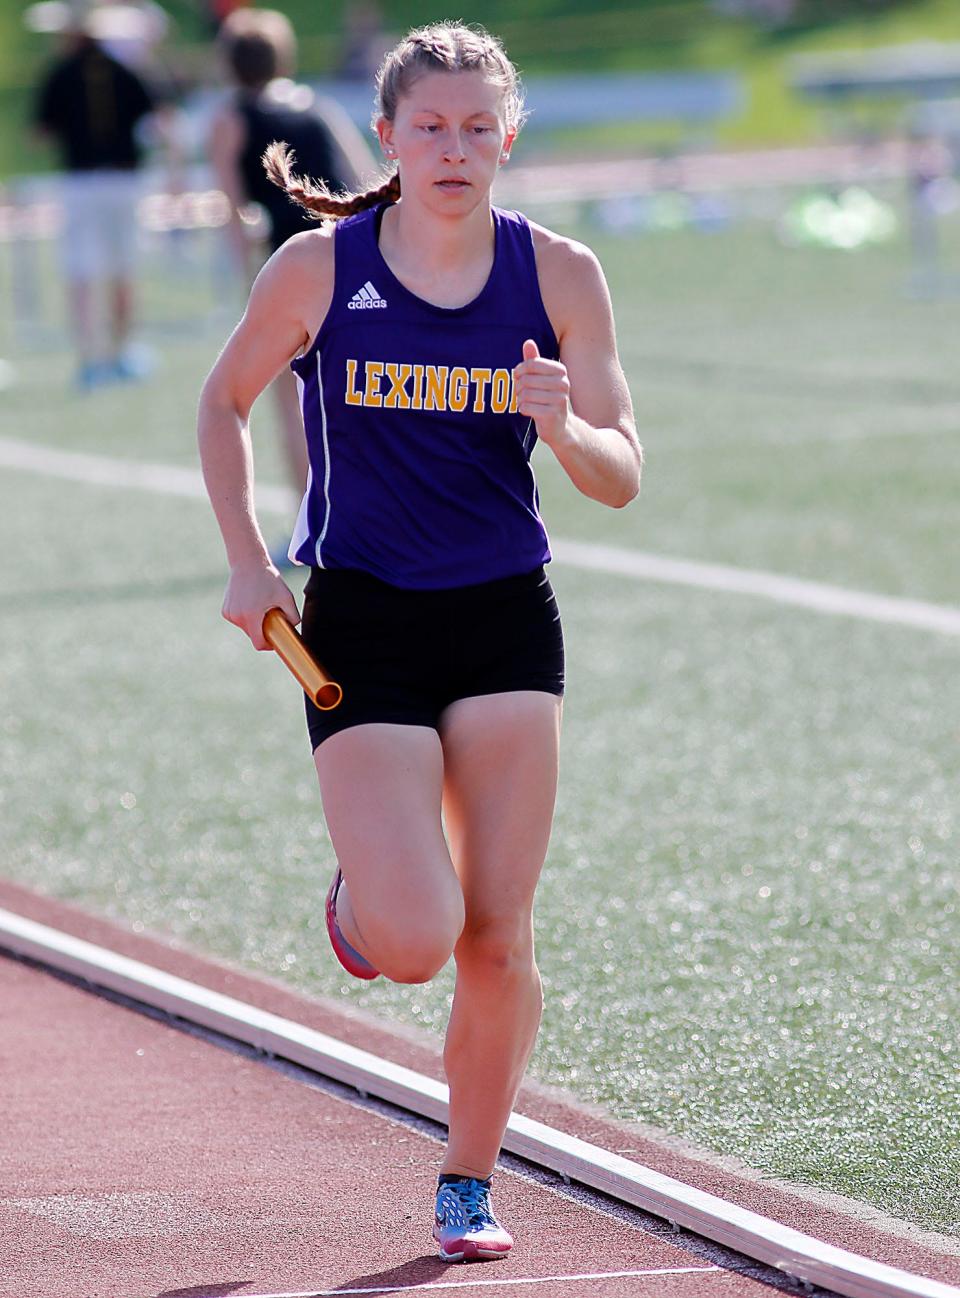 Lexington High School's Karis Hunter competes in the 4x800 meter relay at the Ohio Cardinal Conference track meet held at Ashland University on Friday, May 13, 2022. TOM E. PUSKAR/TIMES-GAZETTE.COM